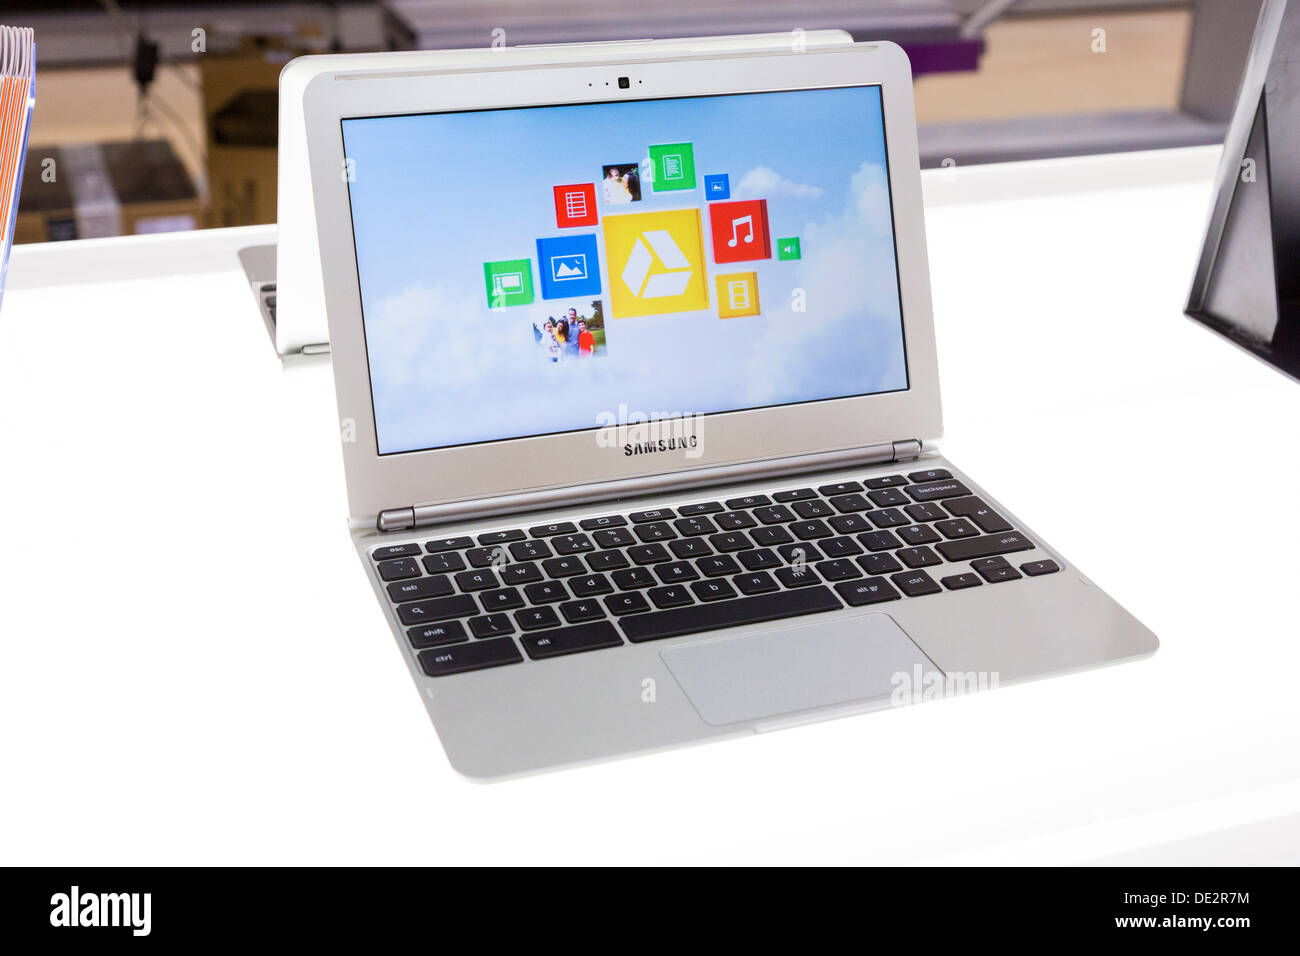 Google Chromebook running on a Samsung laptop computer in a retail store Stock Photo